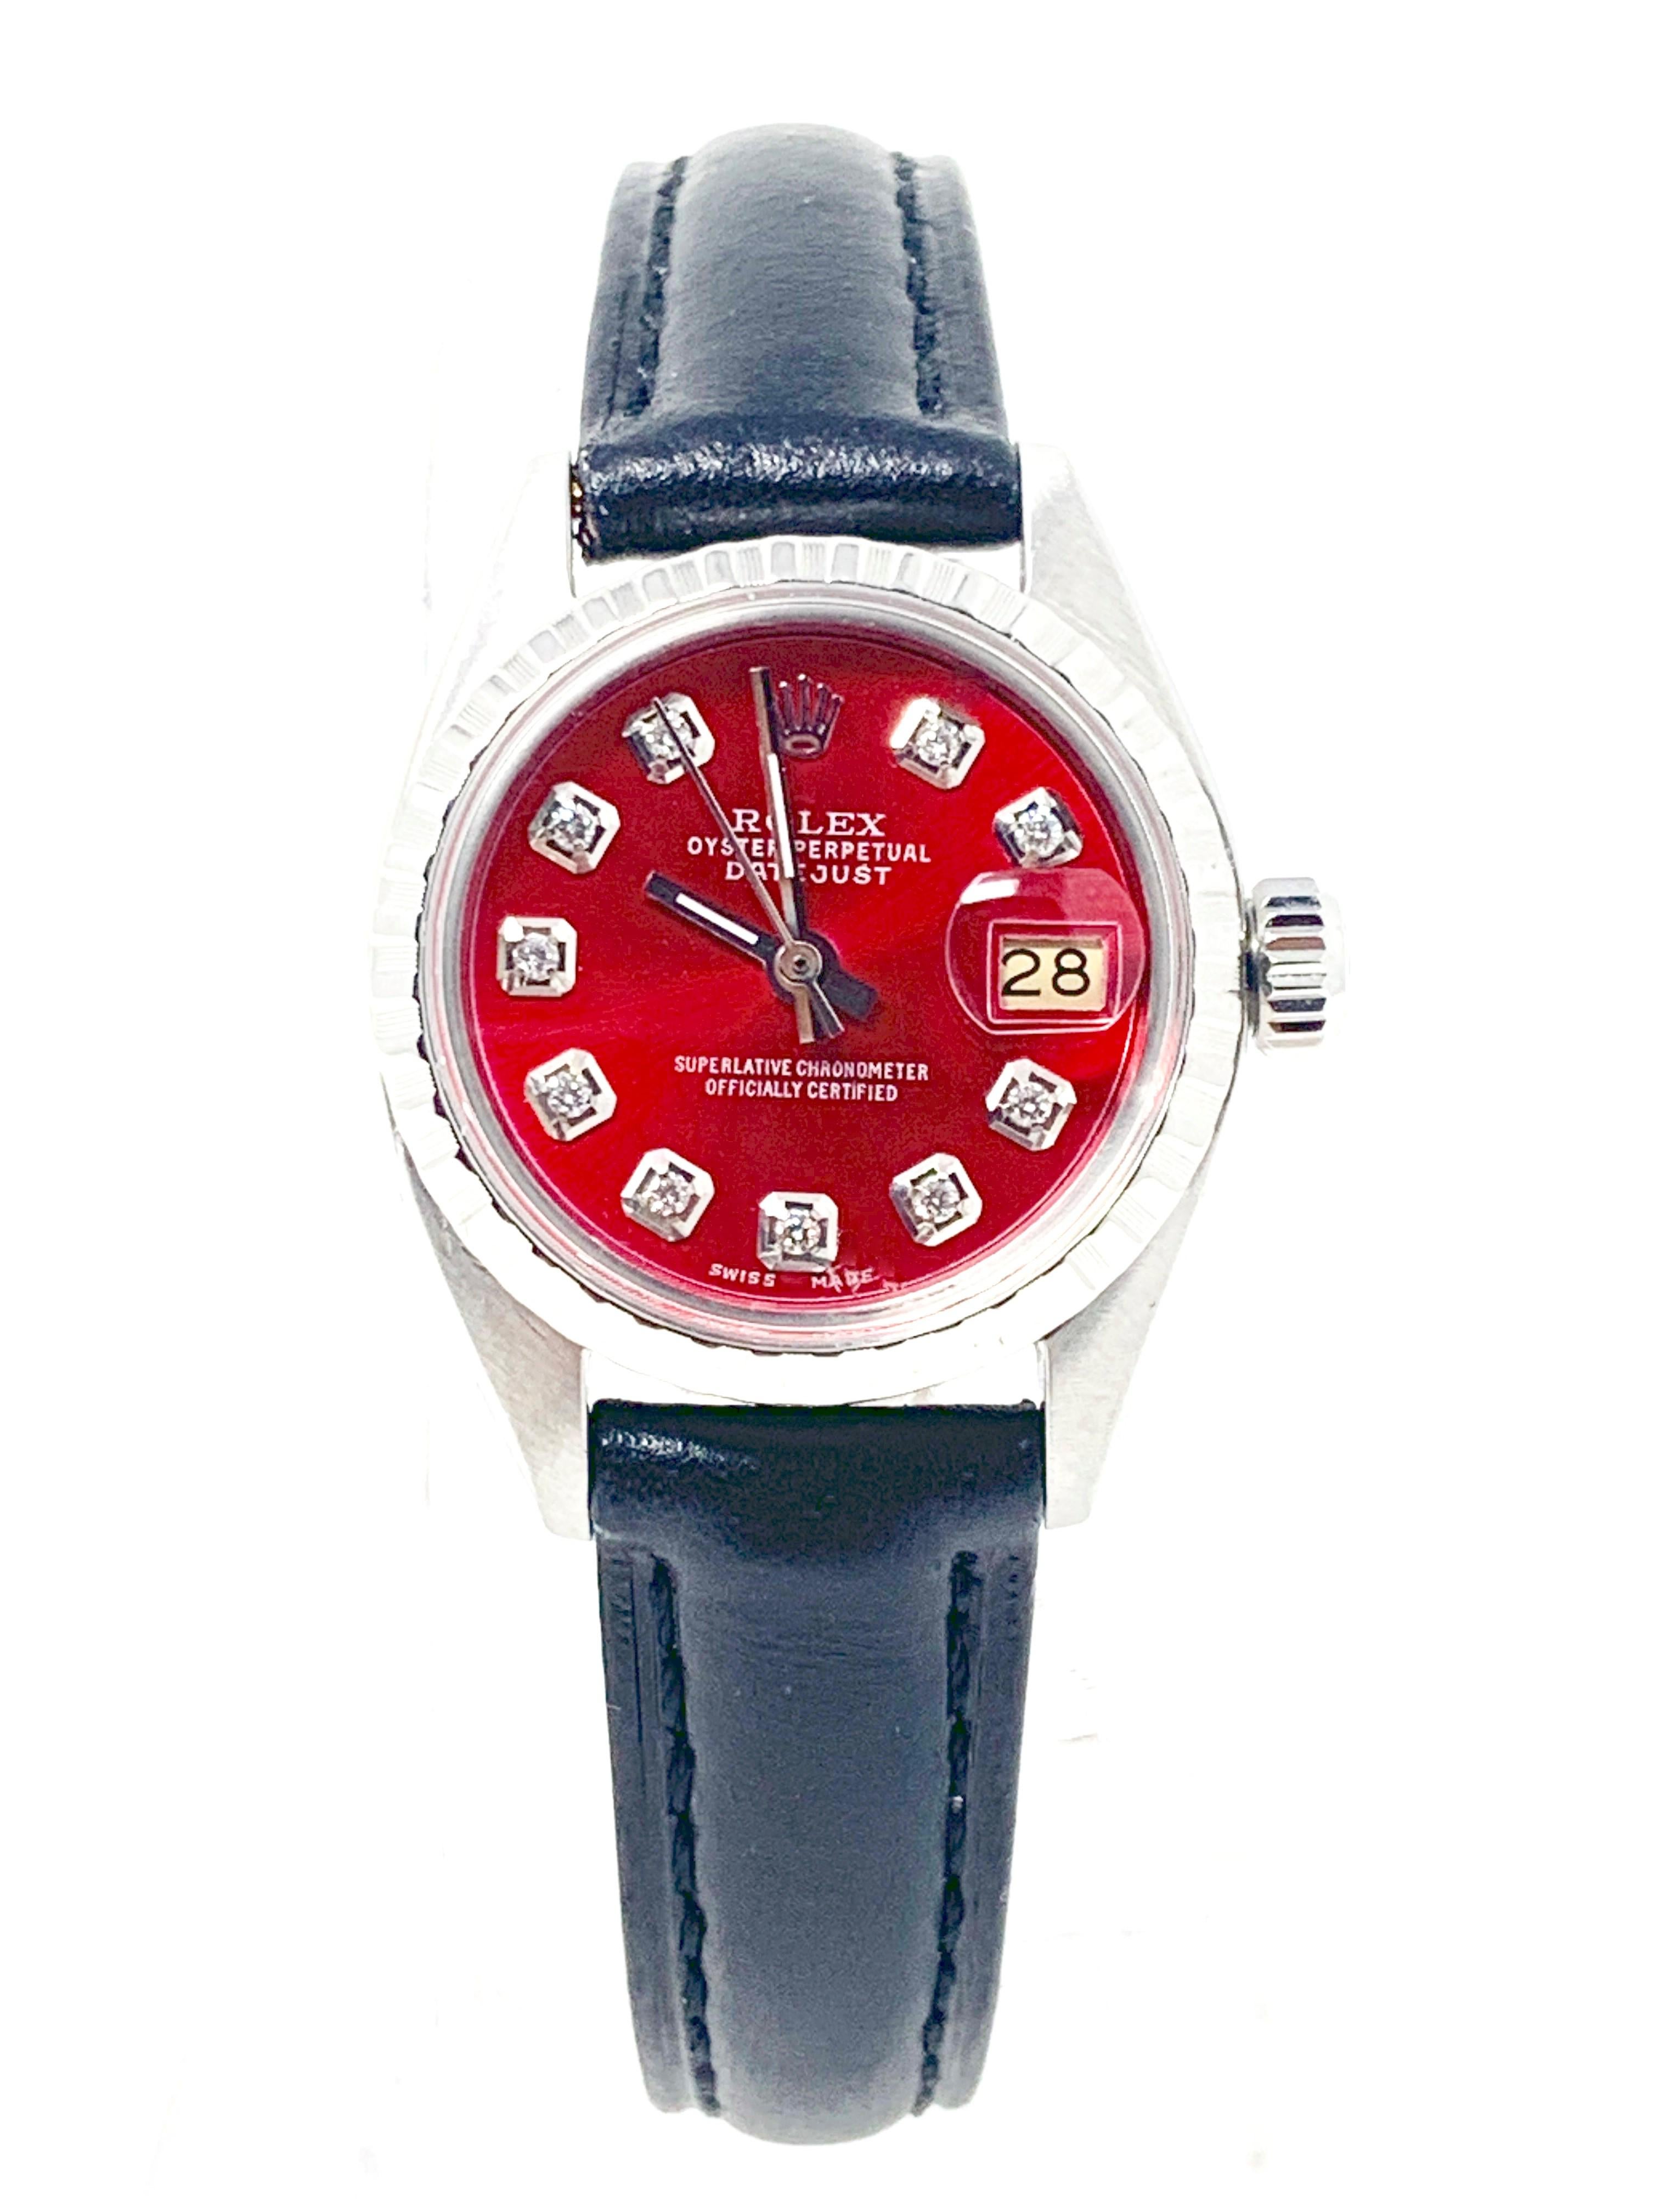 (Watch Description)
Brand - Rolex
Gender - Ladies
Model - 6516 Datejust 
Metals - Stainless steel 
Case size - 26mm
Bezel - Engine turn steel 
Crystal - Acrylic
Movement - Automatic Cal.1161
Dial - Red diamond
Wrist band - Black leather
Wrist size -